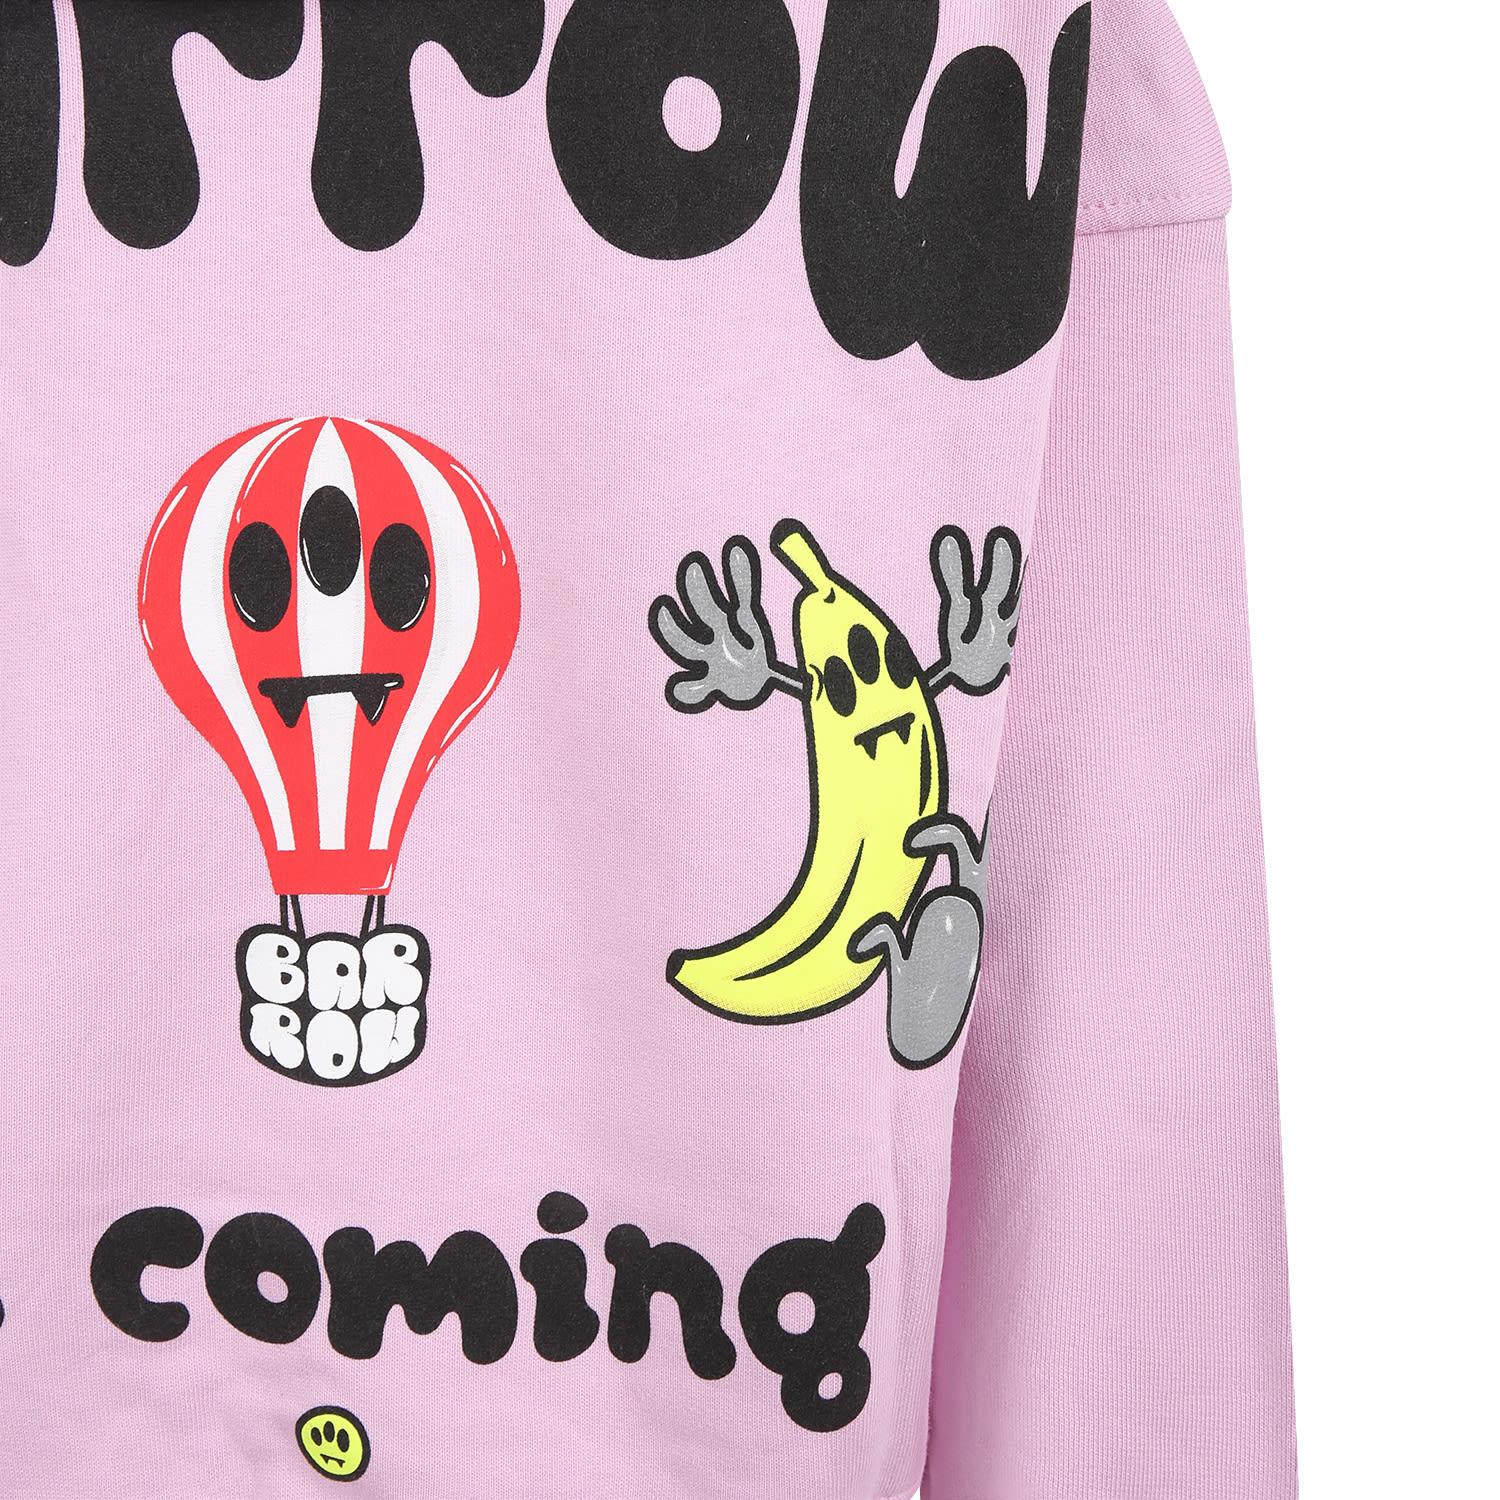 Shop Barrow Pink Sweatshirt For Girls With Logo And Hot Air Balloon In Rosa